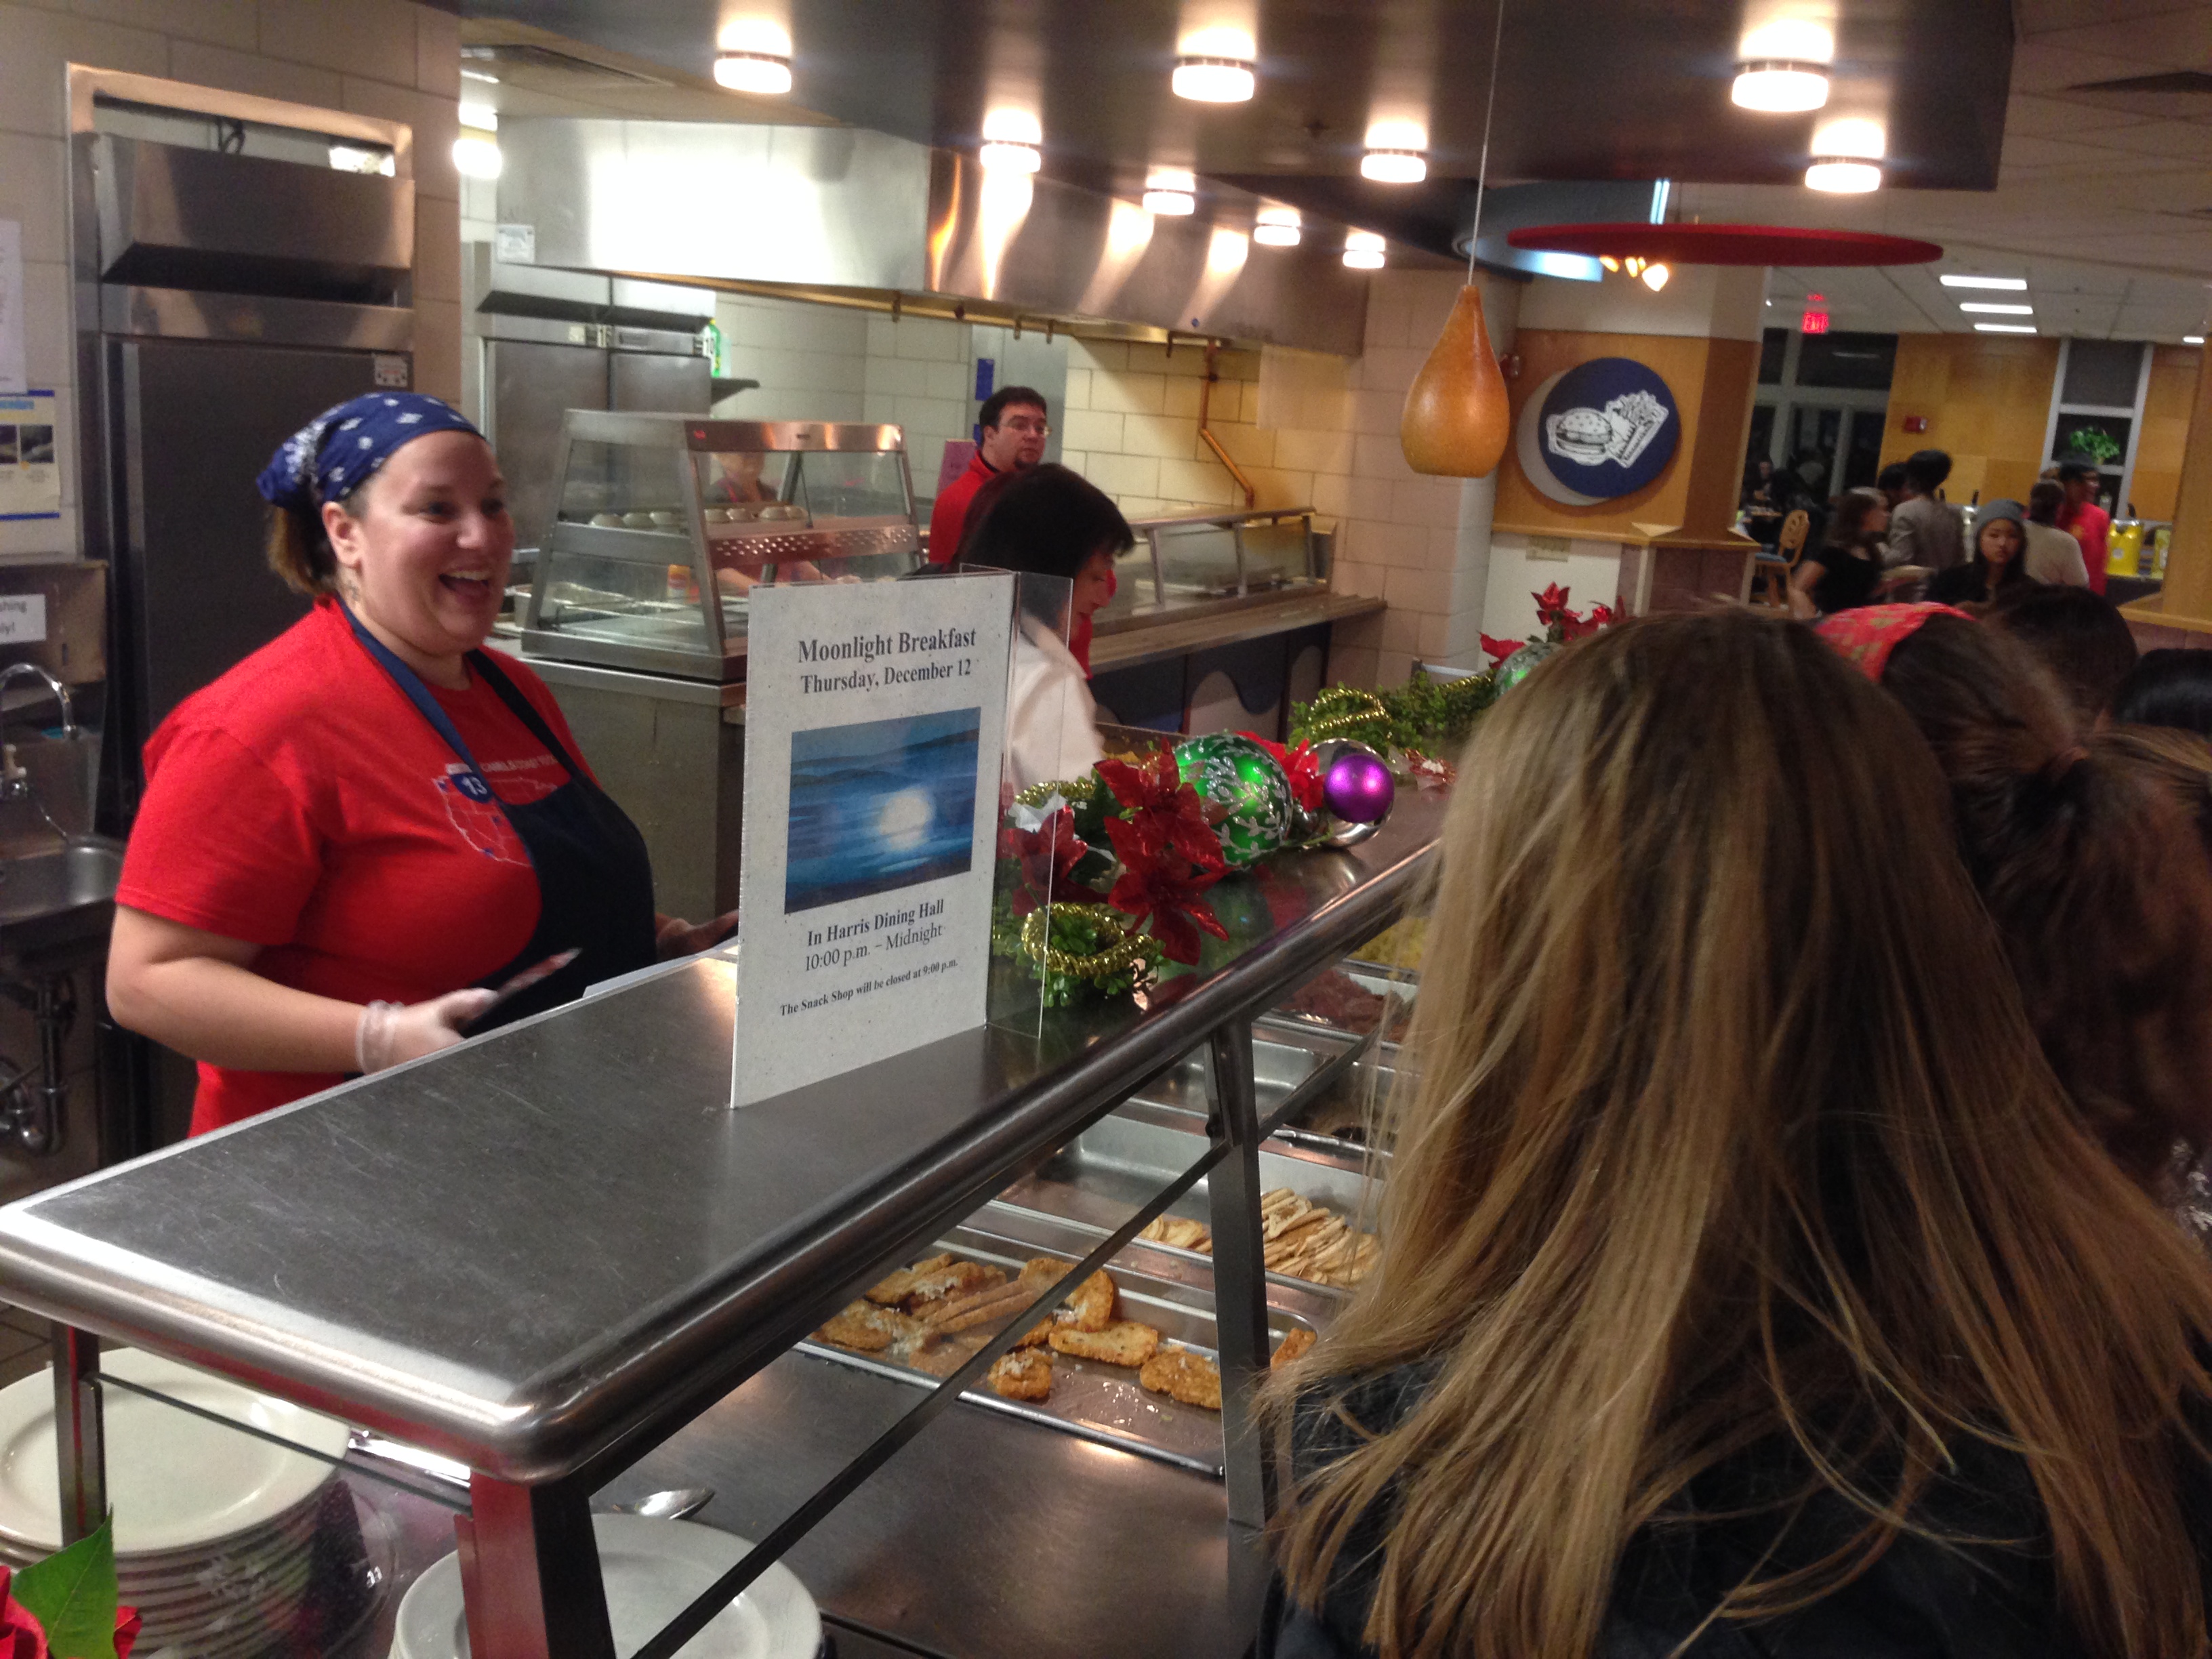 Director of Residential Education and Living serves food to students